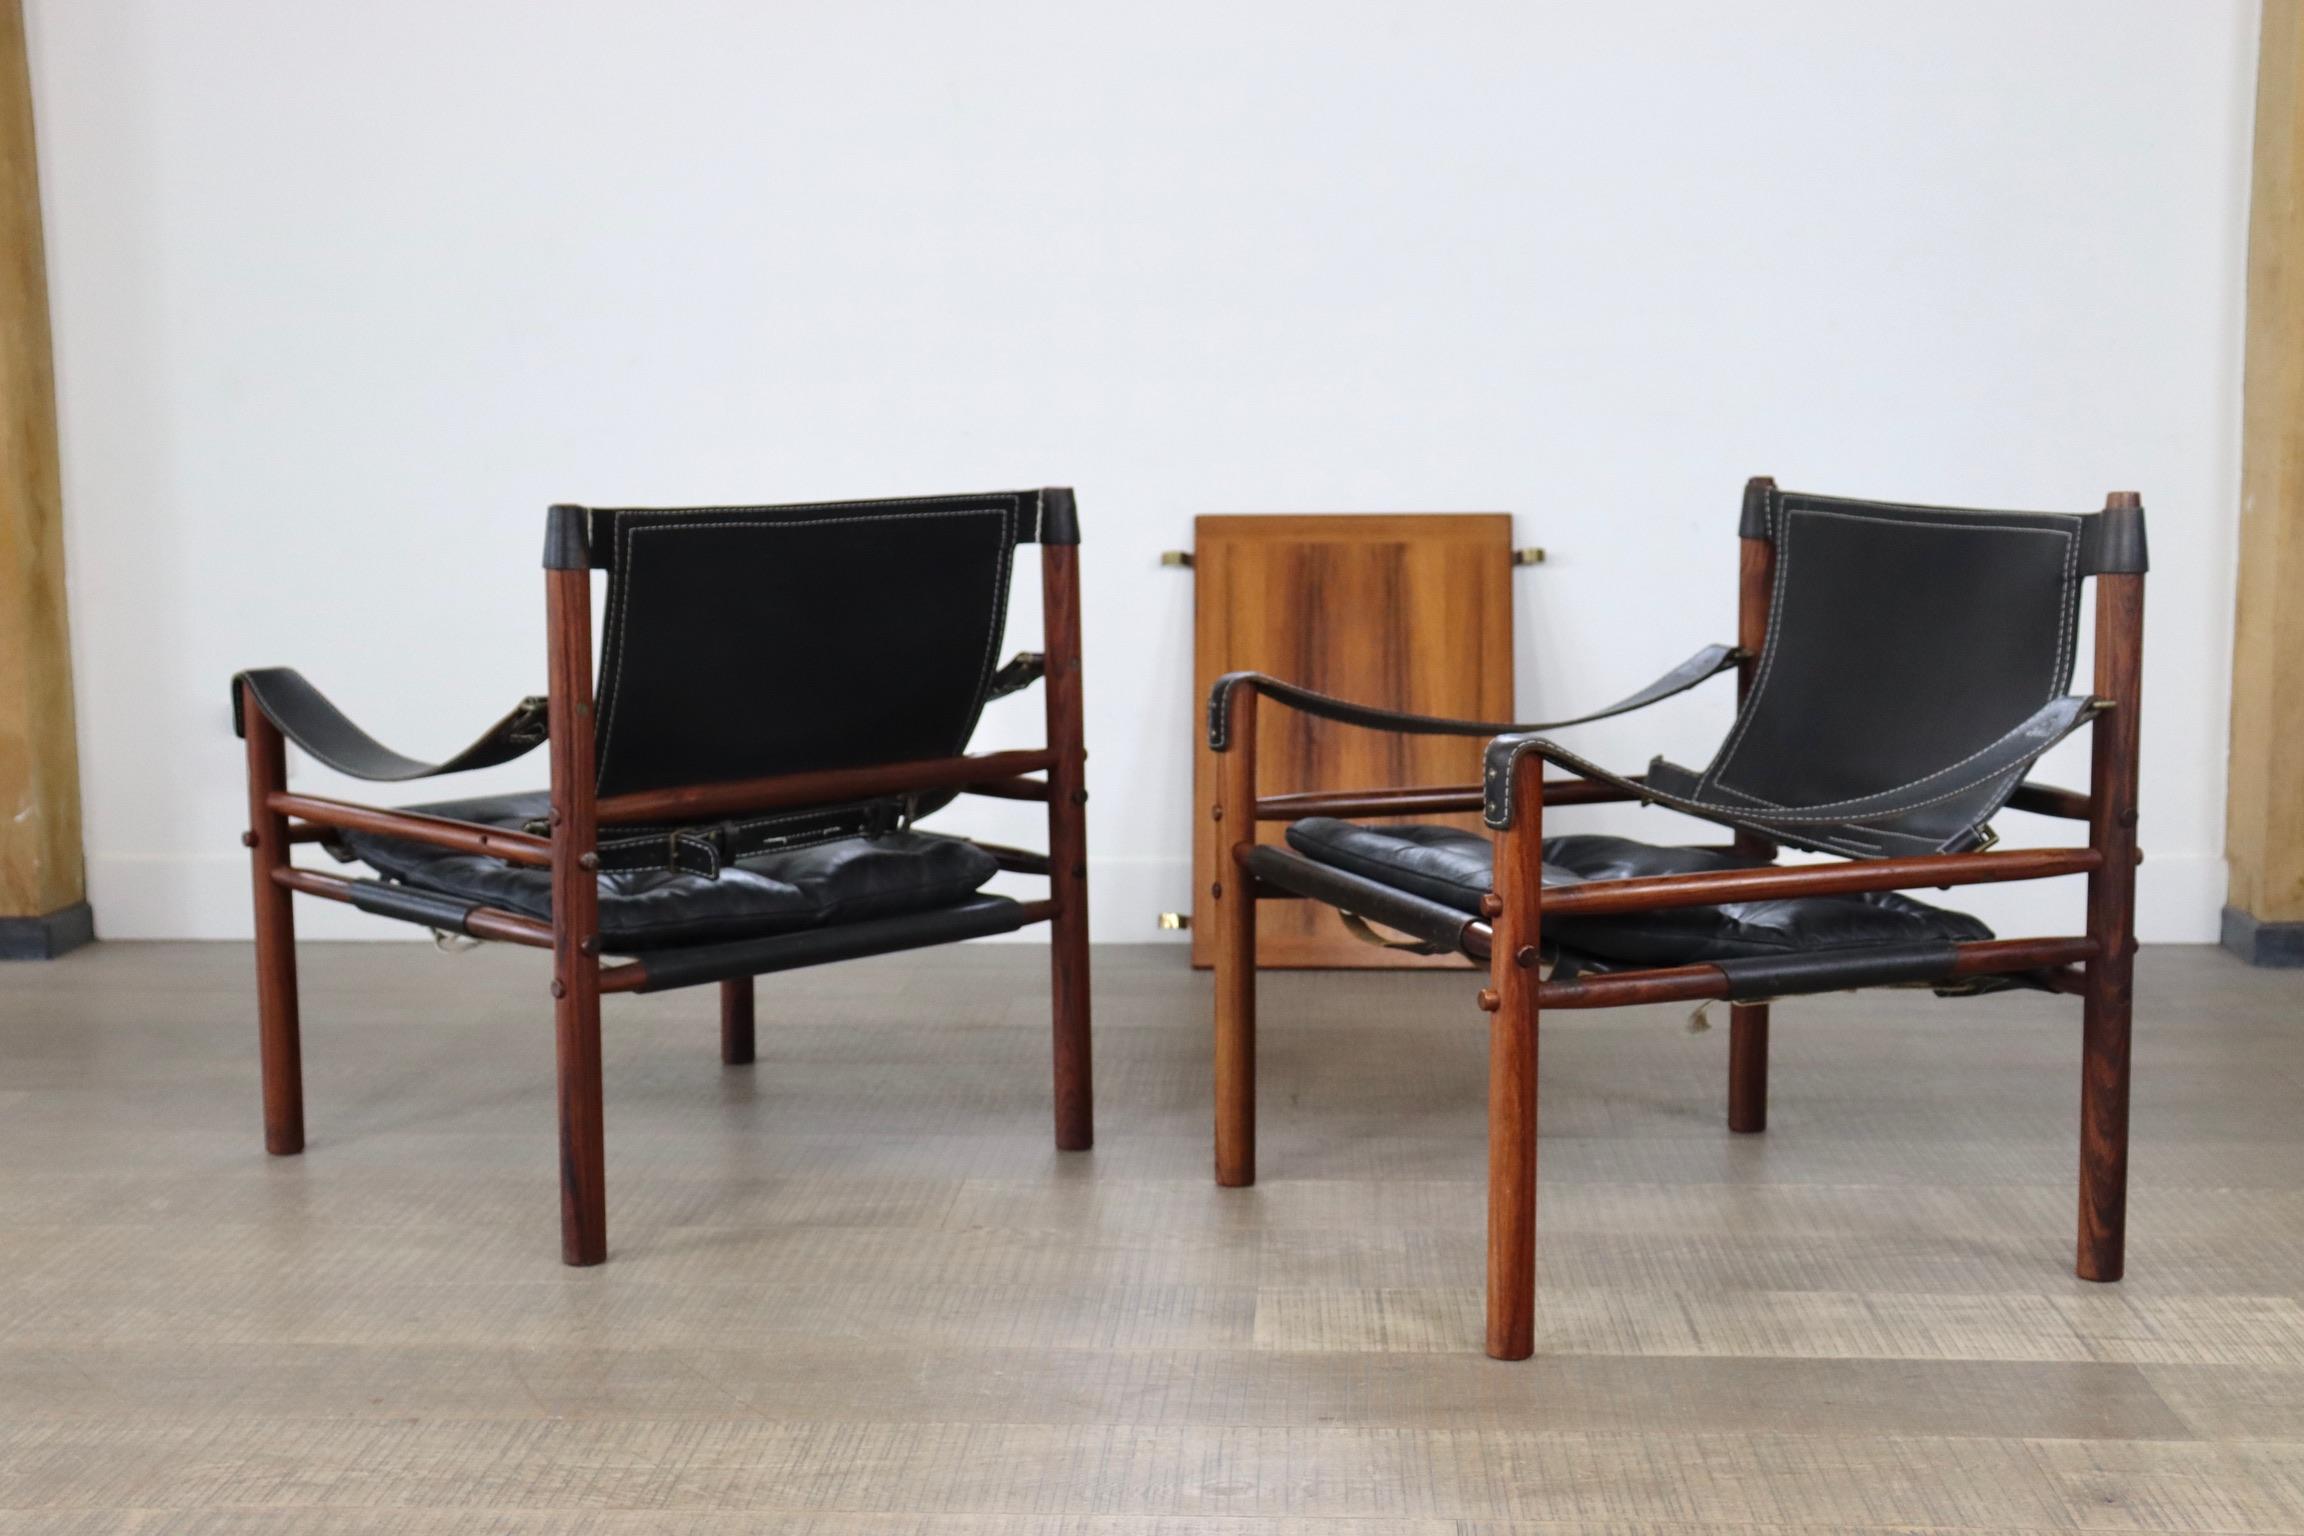 Model Sirocco Easy Chairs with Side Table by Arne Norell for Arne Norell AB, 196 7